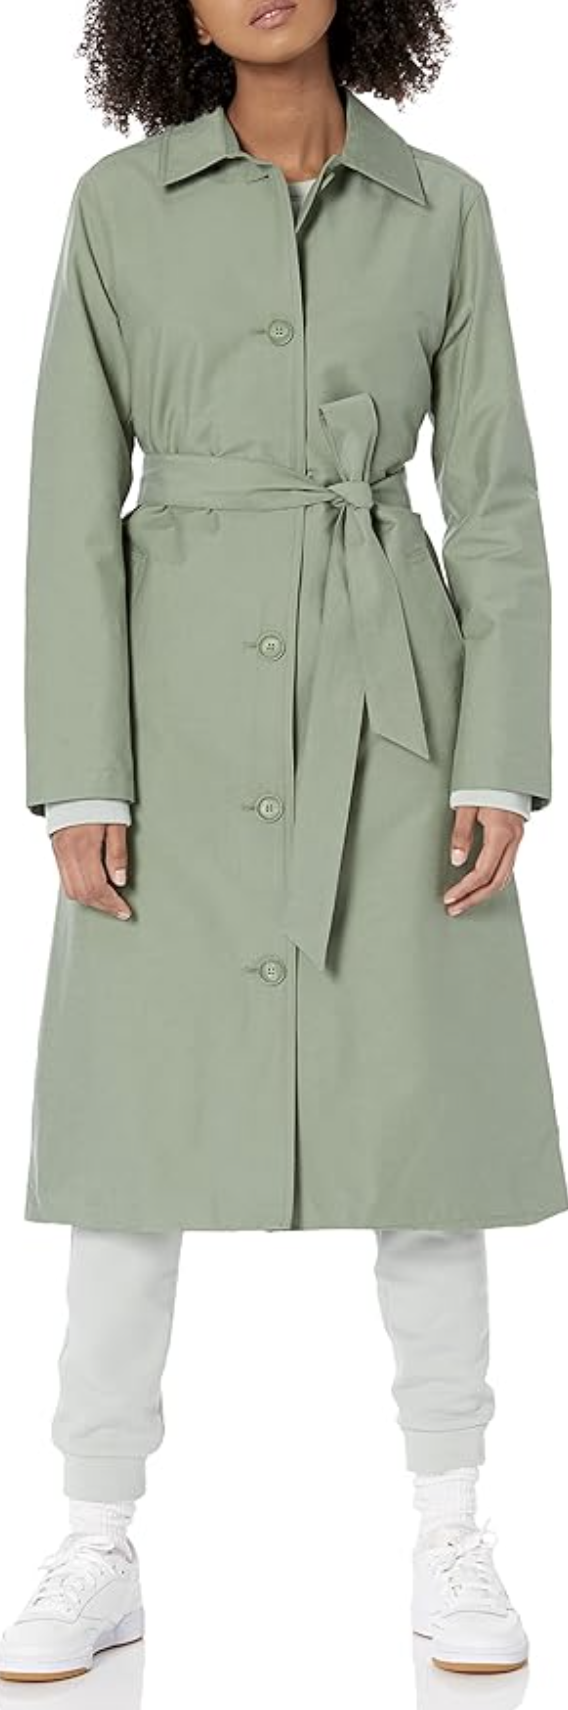 Amazon Essentials Women's Relaxed-Fit Water Repellant Trench Coat